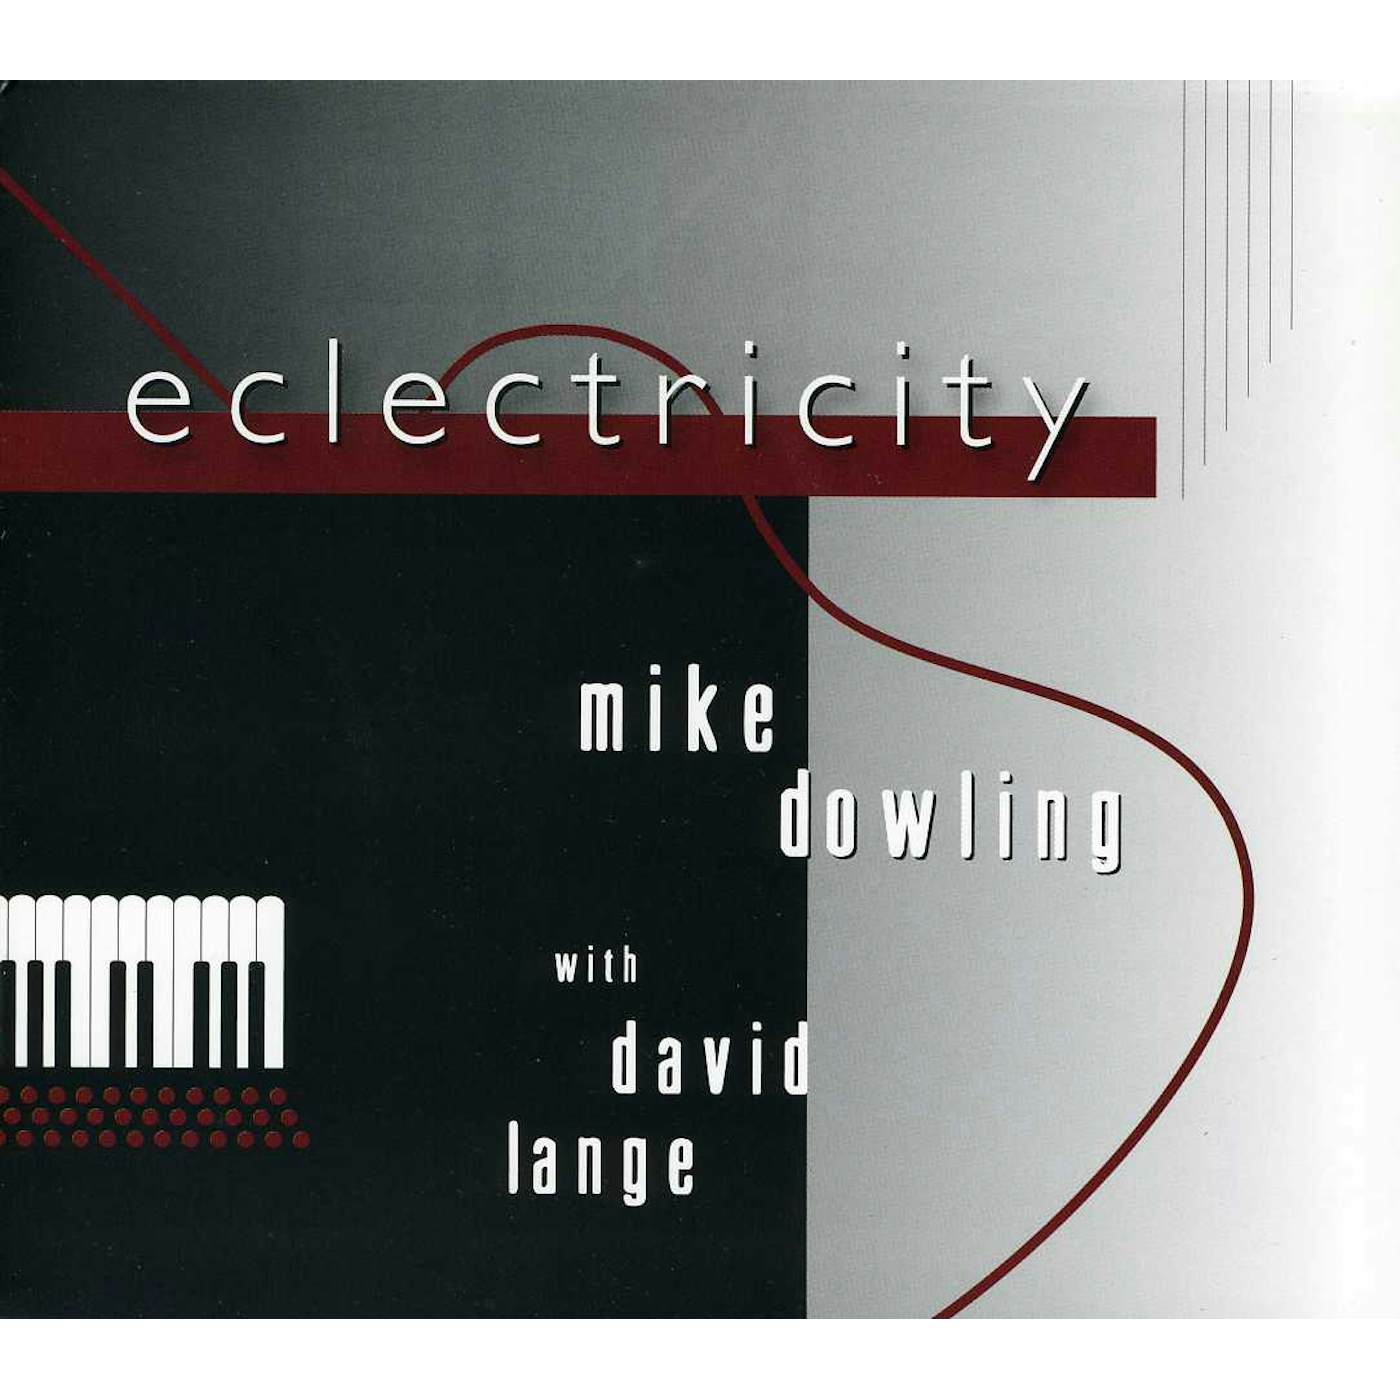 Mike Dowling ECLECTRICITY CD